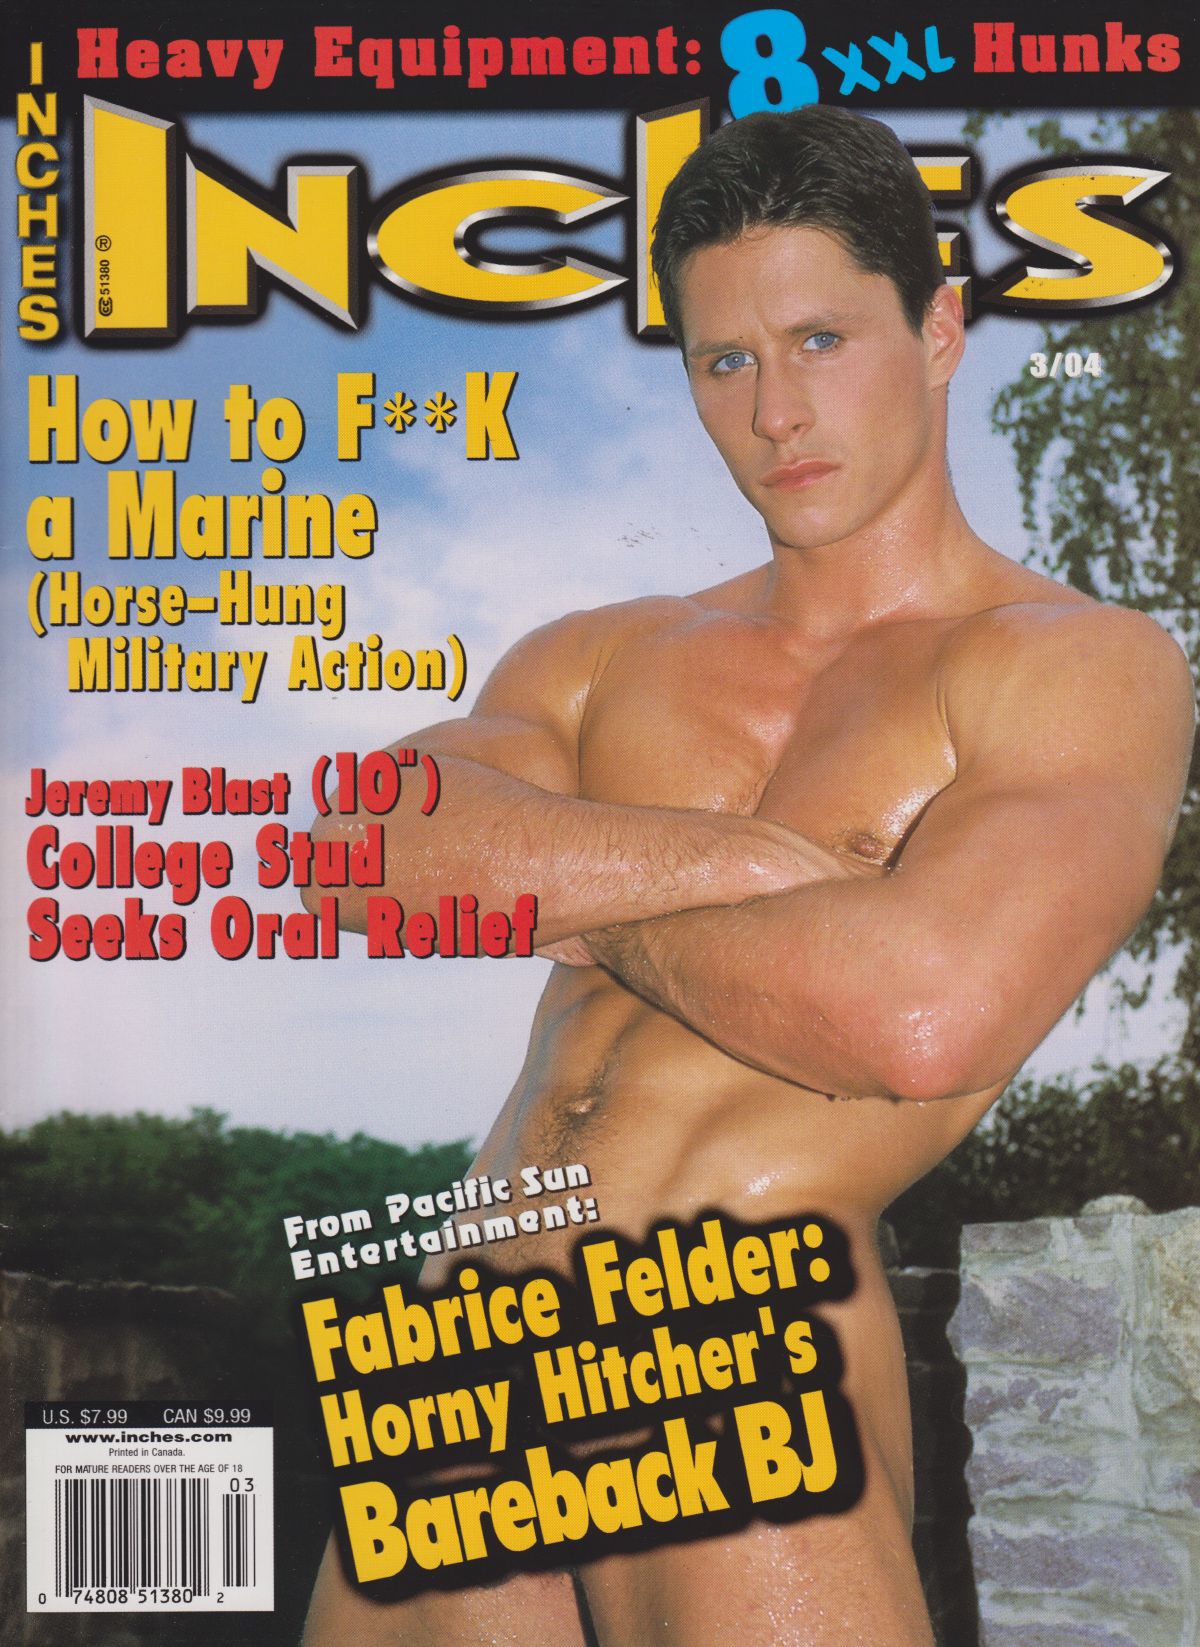 Inches March 2004 magazine back issue Inches magizine back copy Inches March 2004 Naked Men Gay Adult Magazine Bak Issue Published by  Mavety Media Group. Coverguy Fabrice Felder.